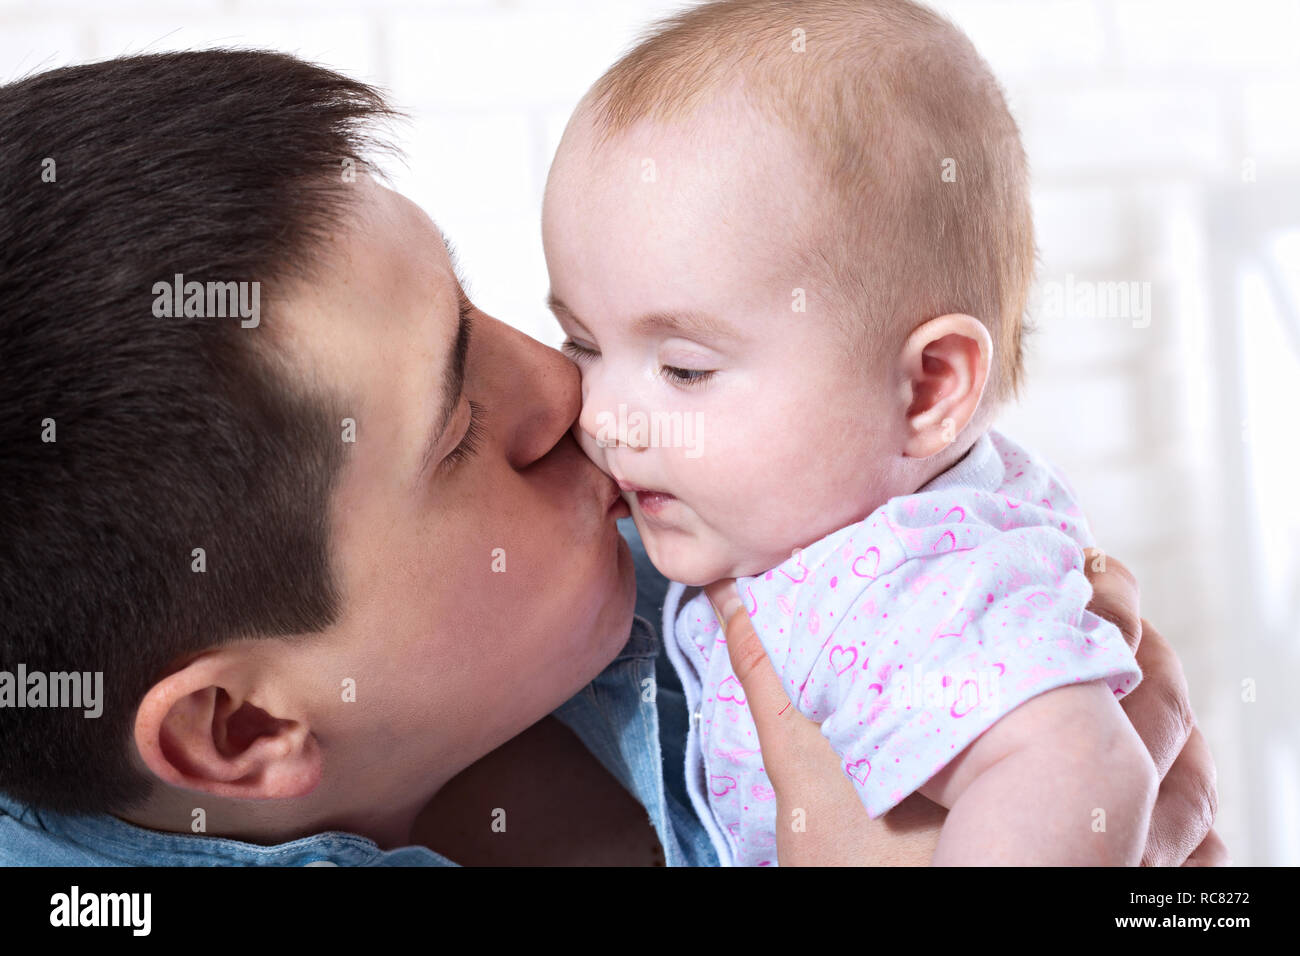 baby with dad. family, parenthood and people concept - father with little baby at home Stock Photo